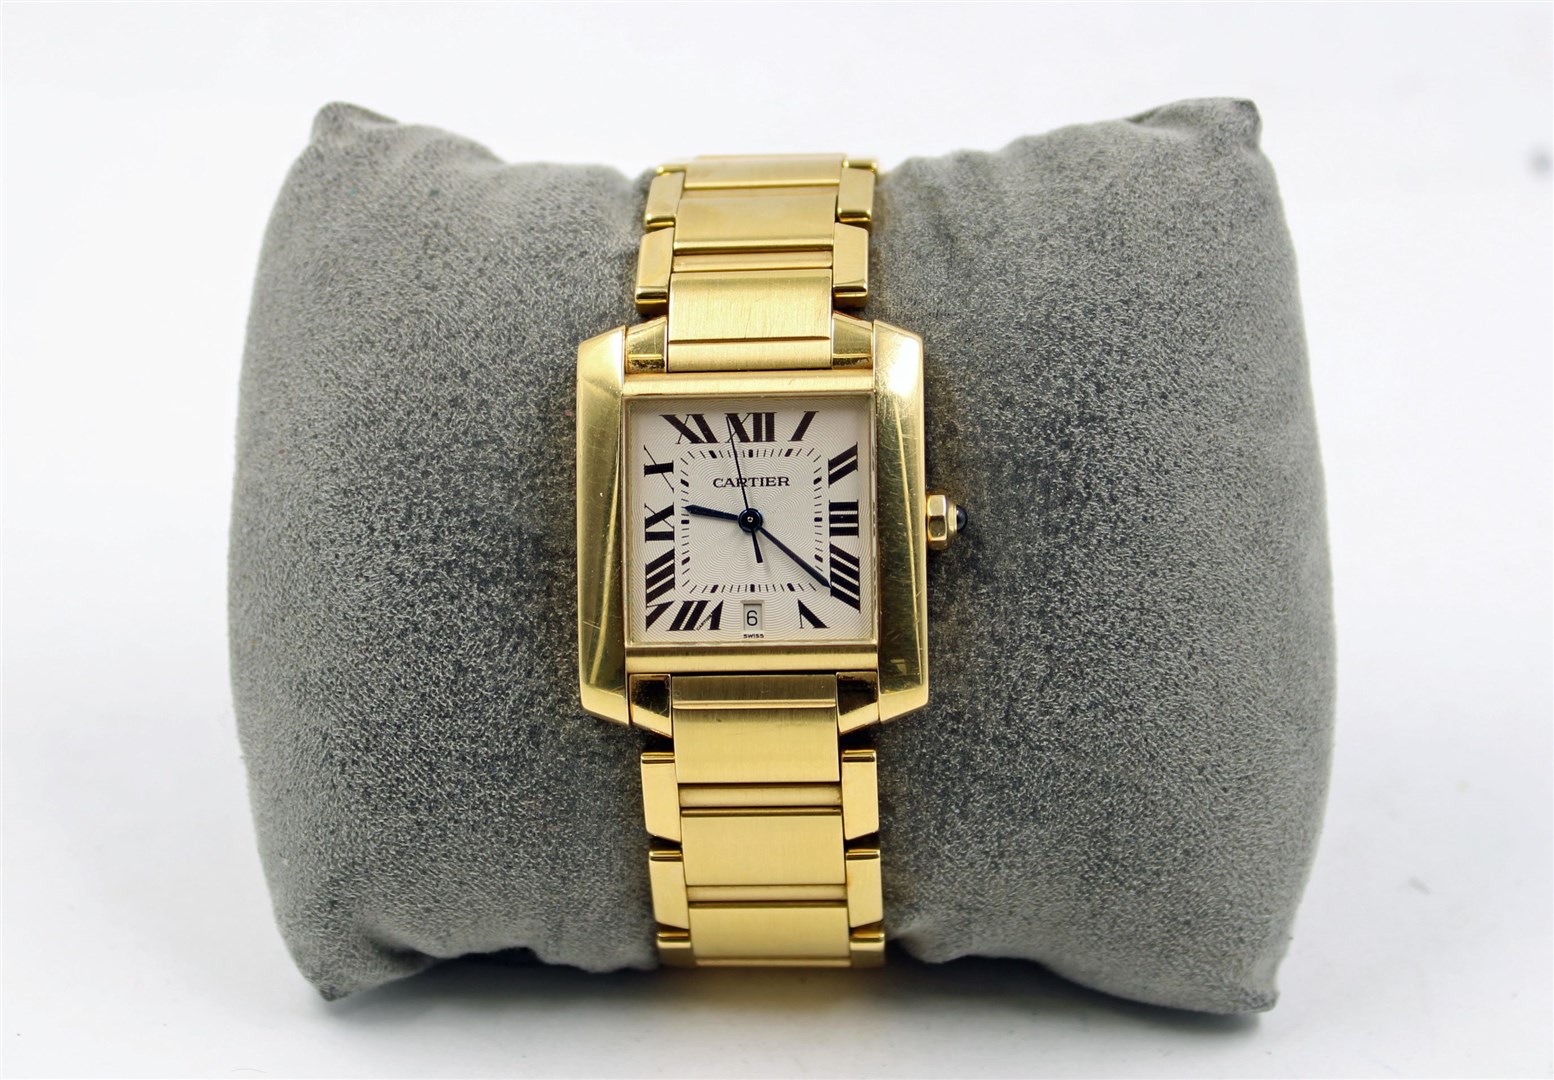 A Cartier watch that was found in a bag of donations at a British Heart Foundation branch (British Heart Foundation/PA)